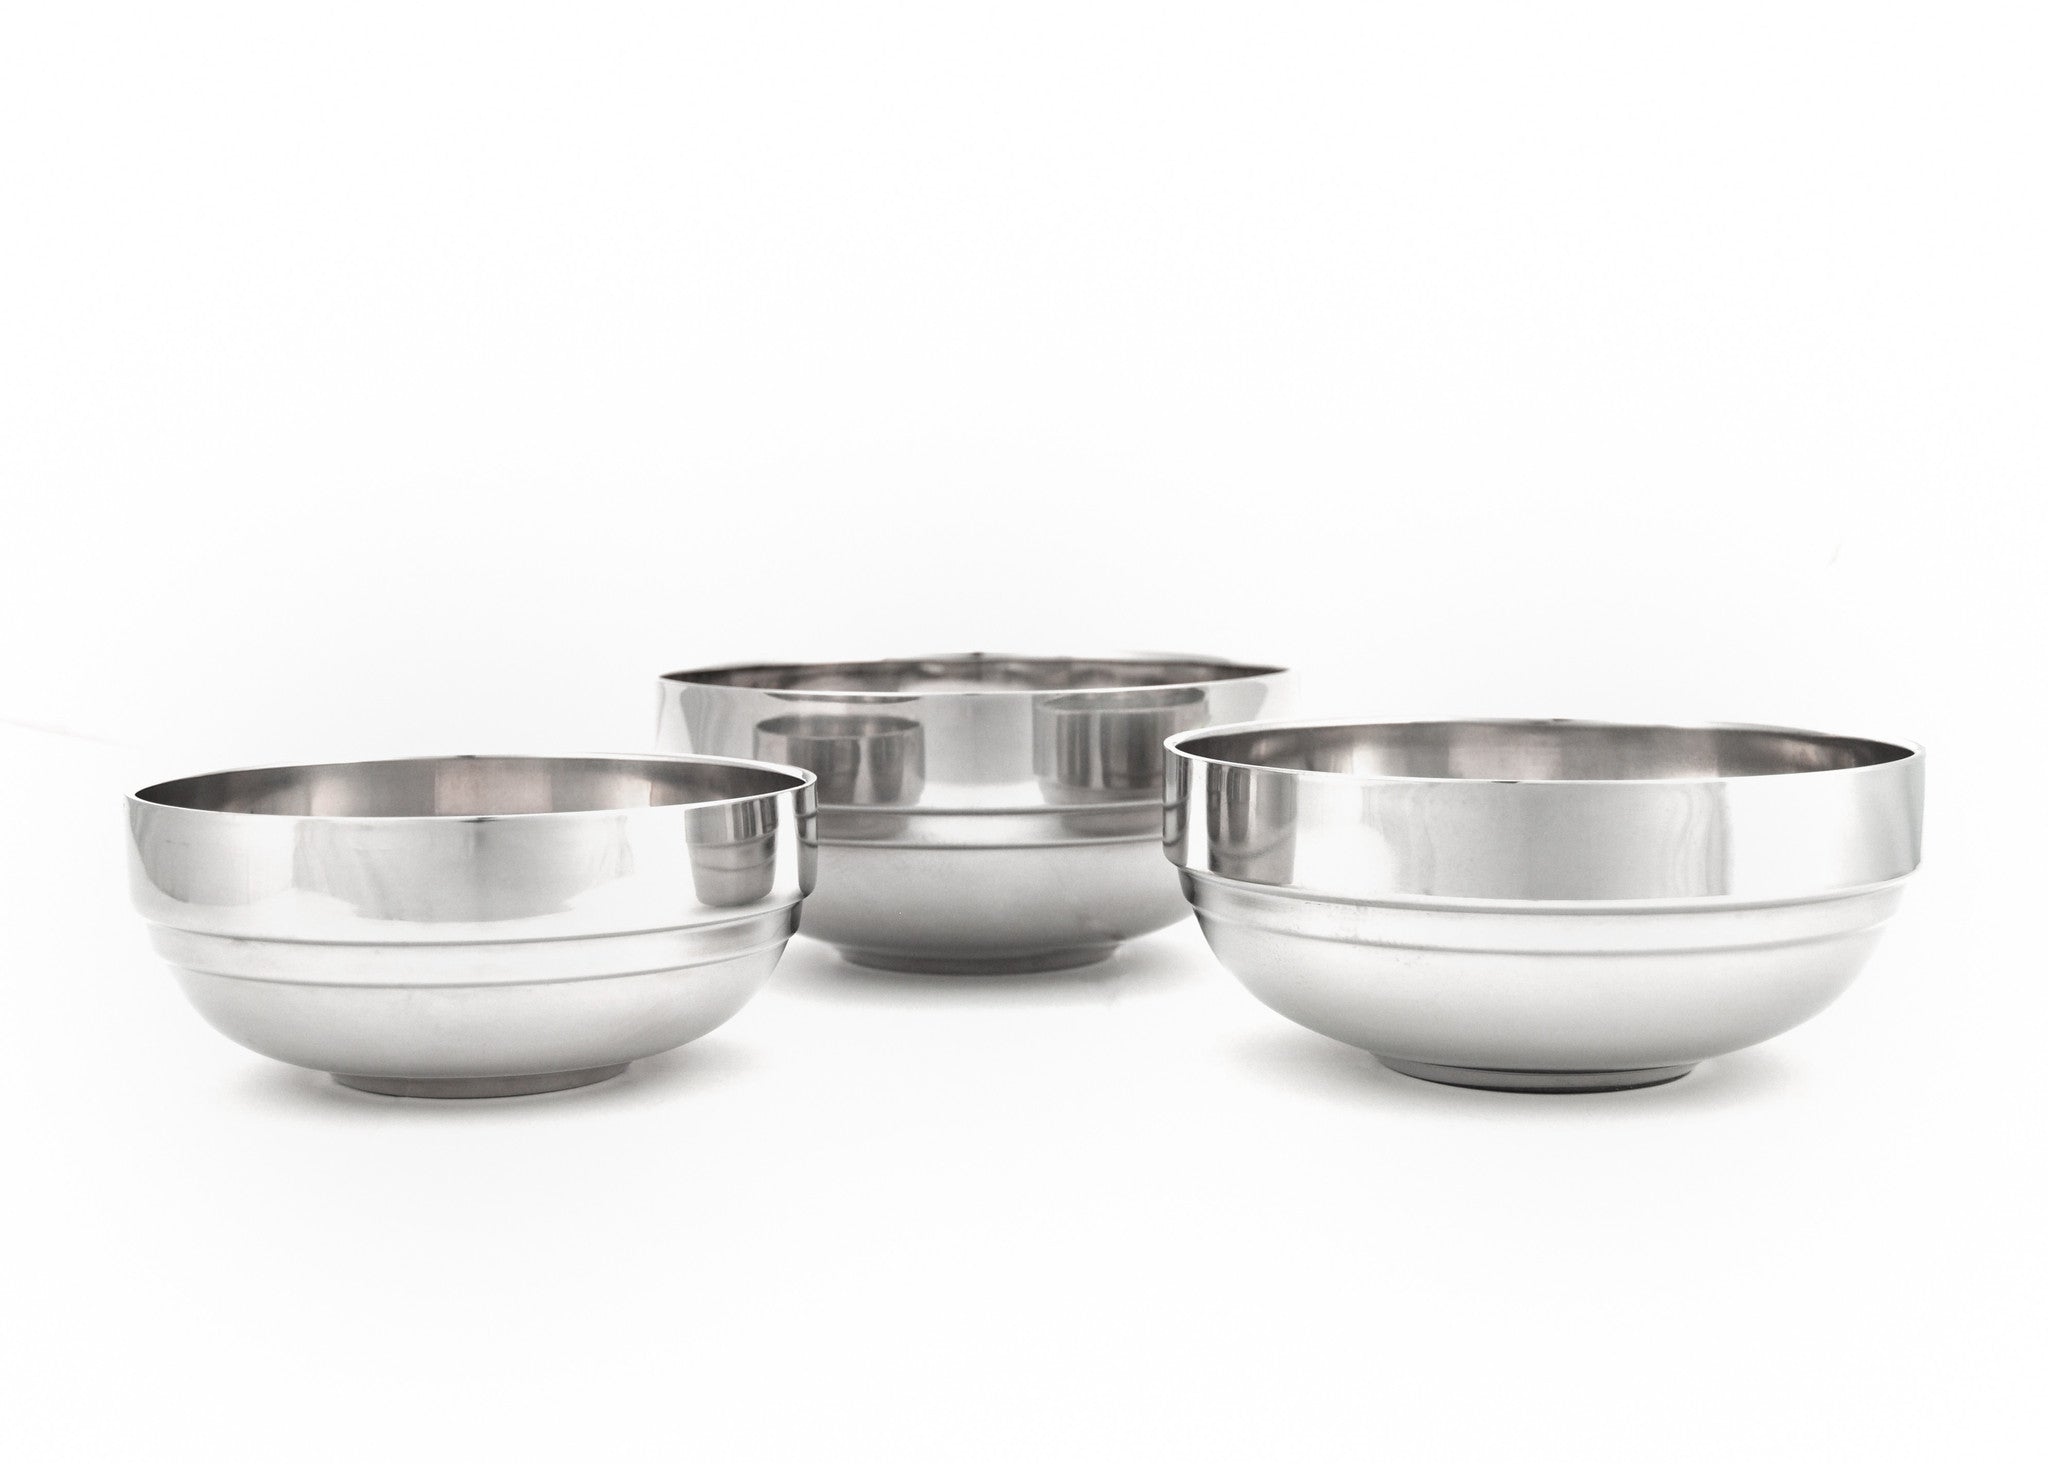 Stainless Steel Double Wall Bowl (Tangi) 탕기, Stainless Steel - eKitchenary